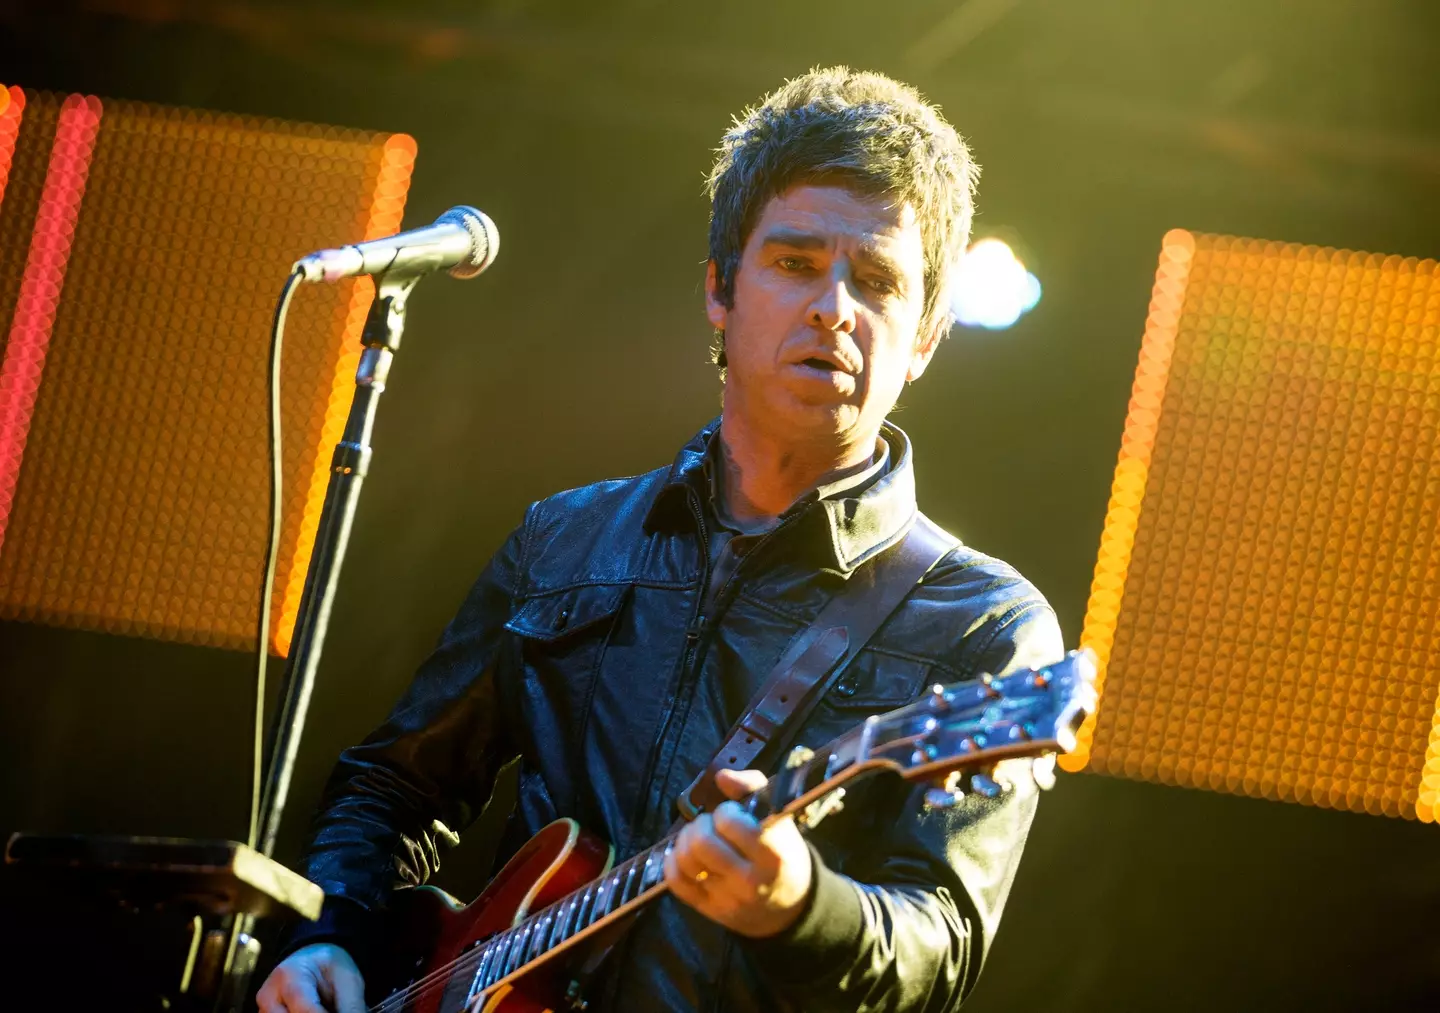 Noel Gallagher has criticised Adele on multiple occasions.